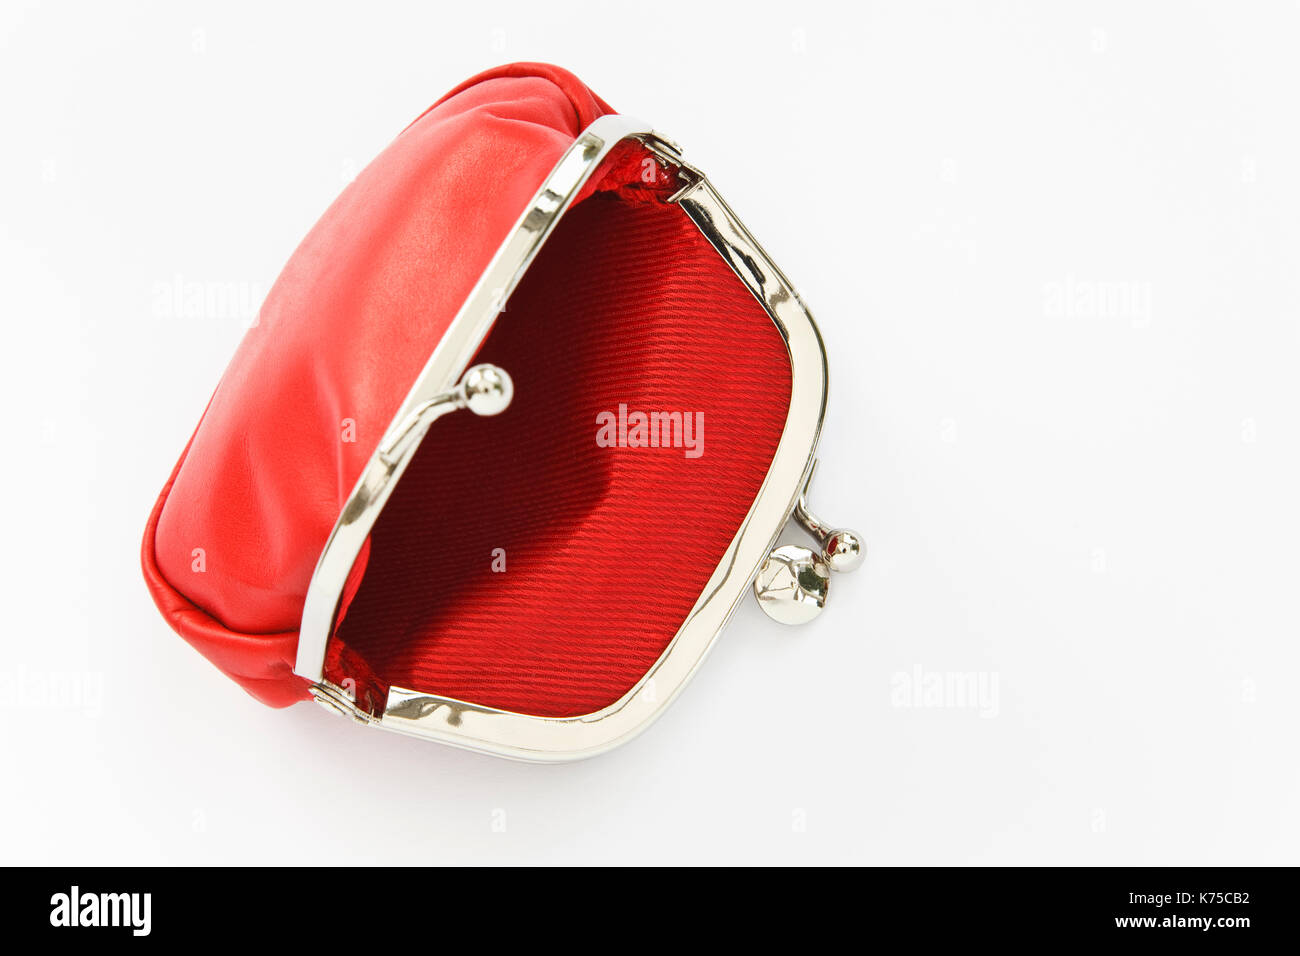 Empty purse open to illustrate poverty and austerity concept. Isolated on a plain white background. England, UK, Britain Stock Photo